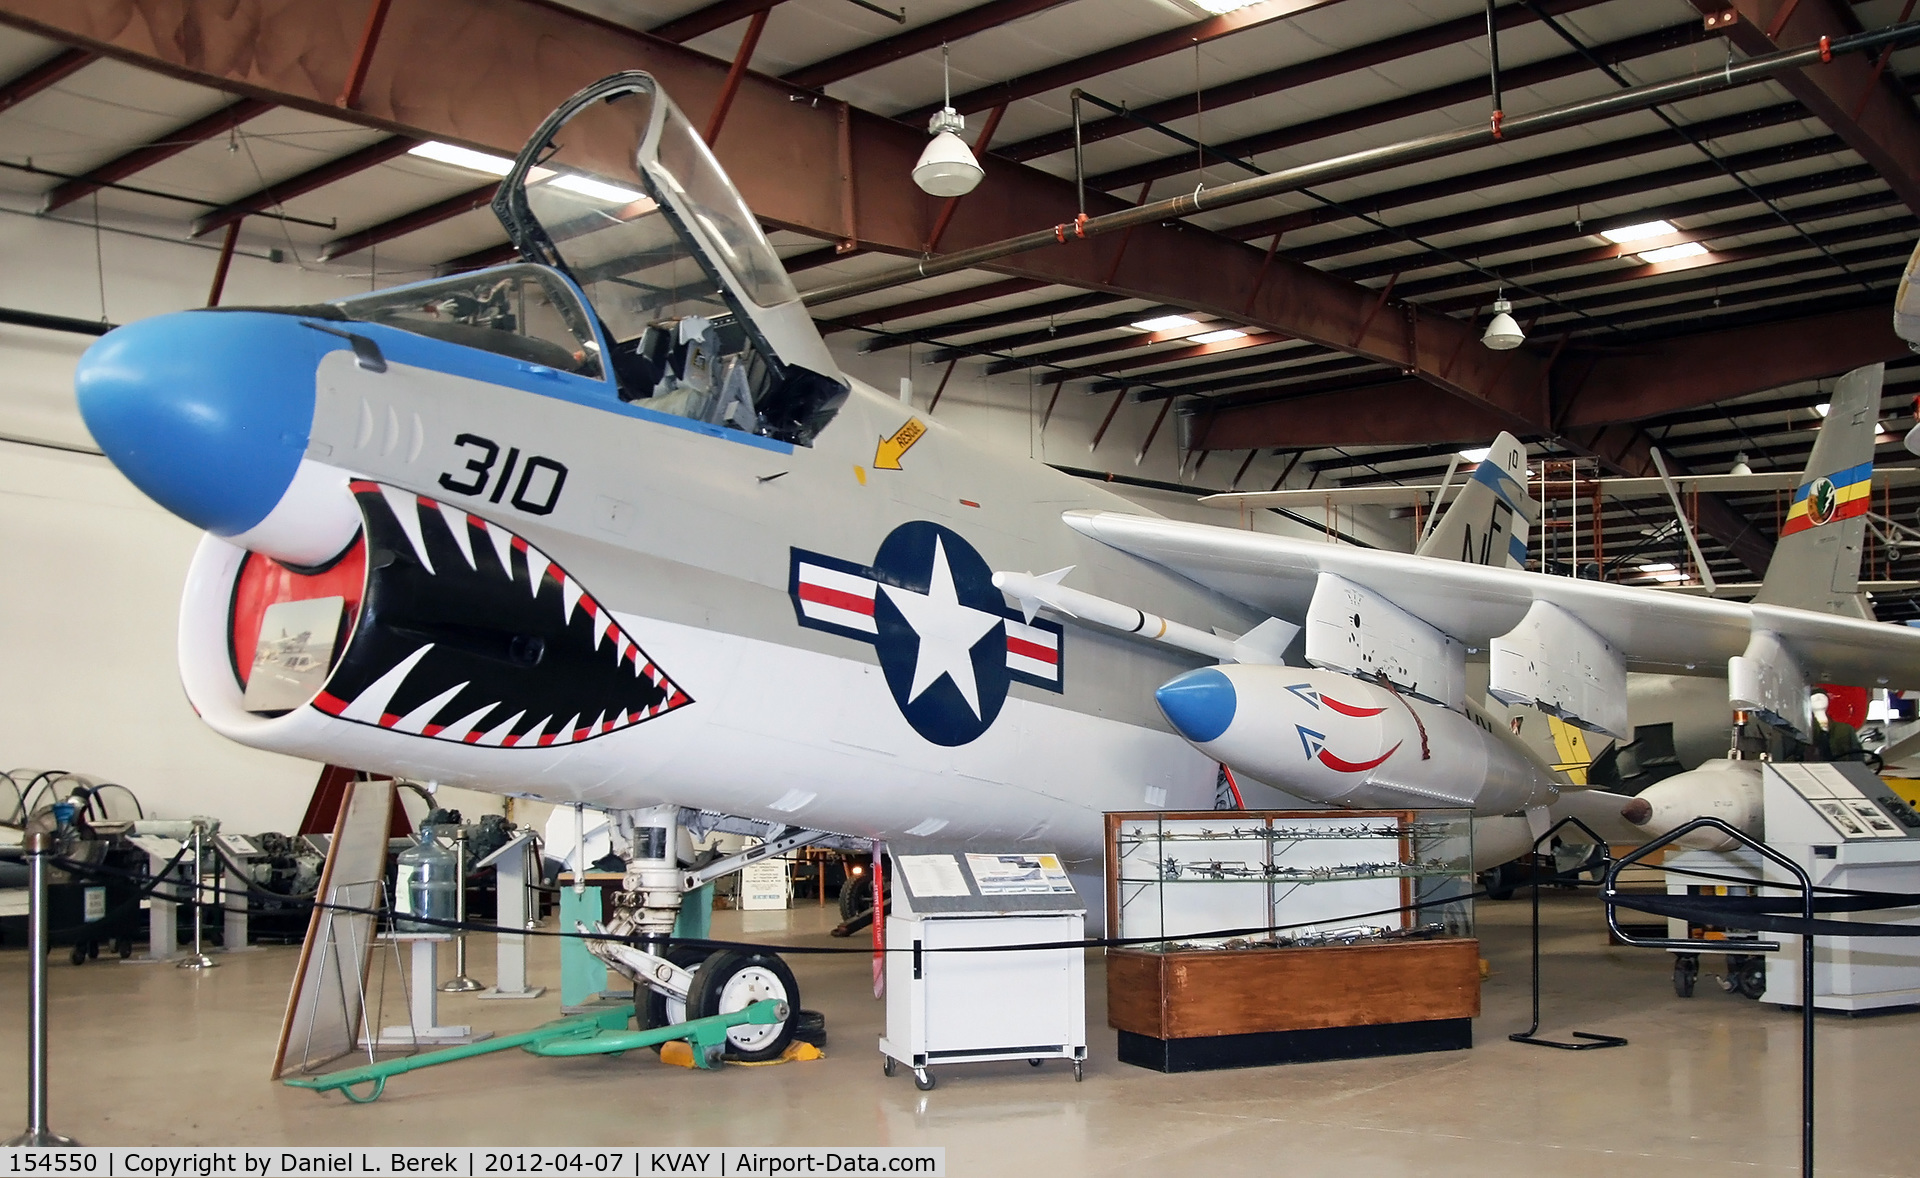 154550, LTV A-7B Corsair II C/N B-190, This beautifully restored Navy warbird is on display at the Air Victory Museum.